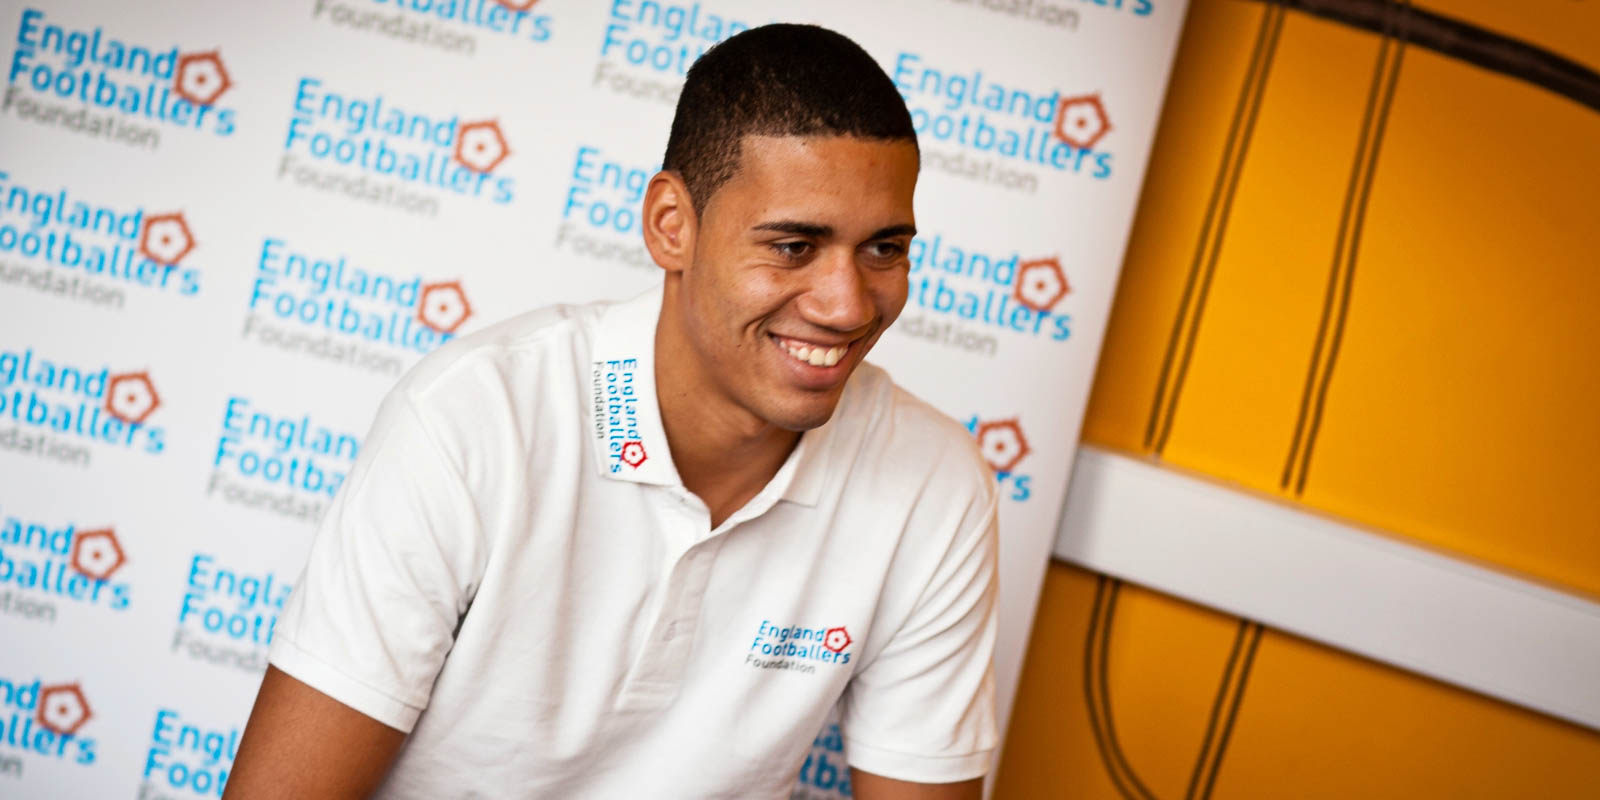 Chris Smalling PR Shoot factory youth zone Manchester • Neilson Reeves Photography